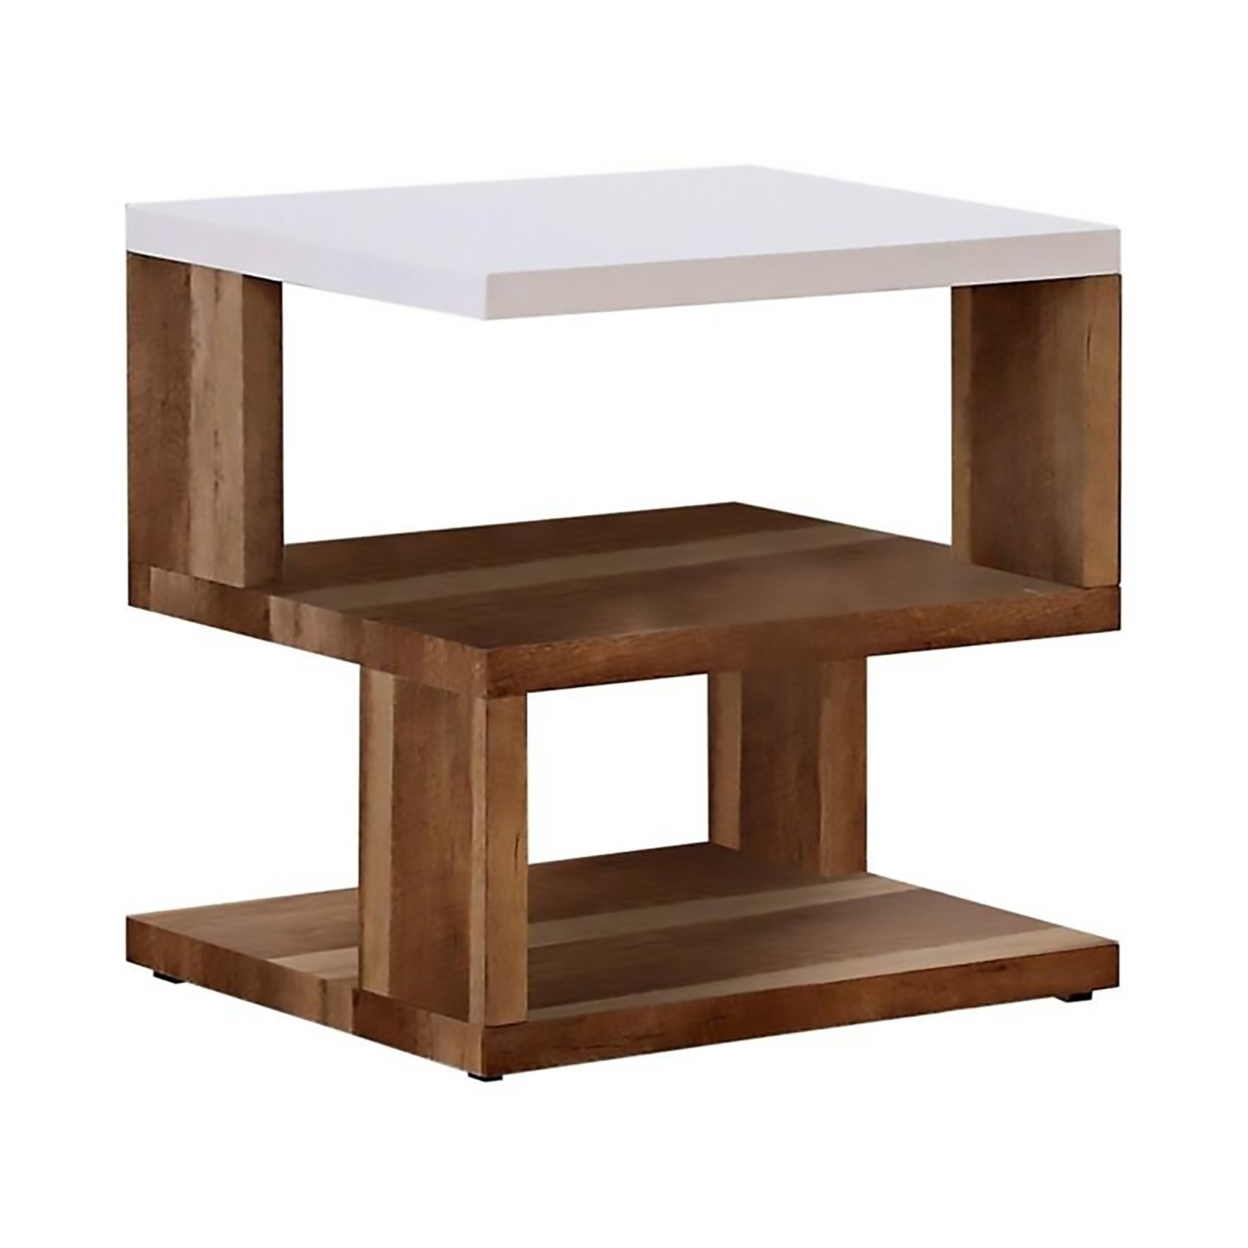 End Table With 2 Tier Shelves And Panel Legs, Brown And White- Saltoro Sherpi